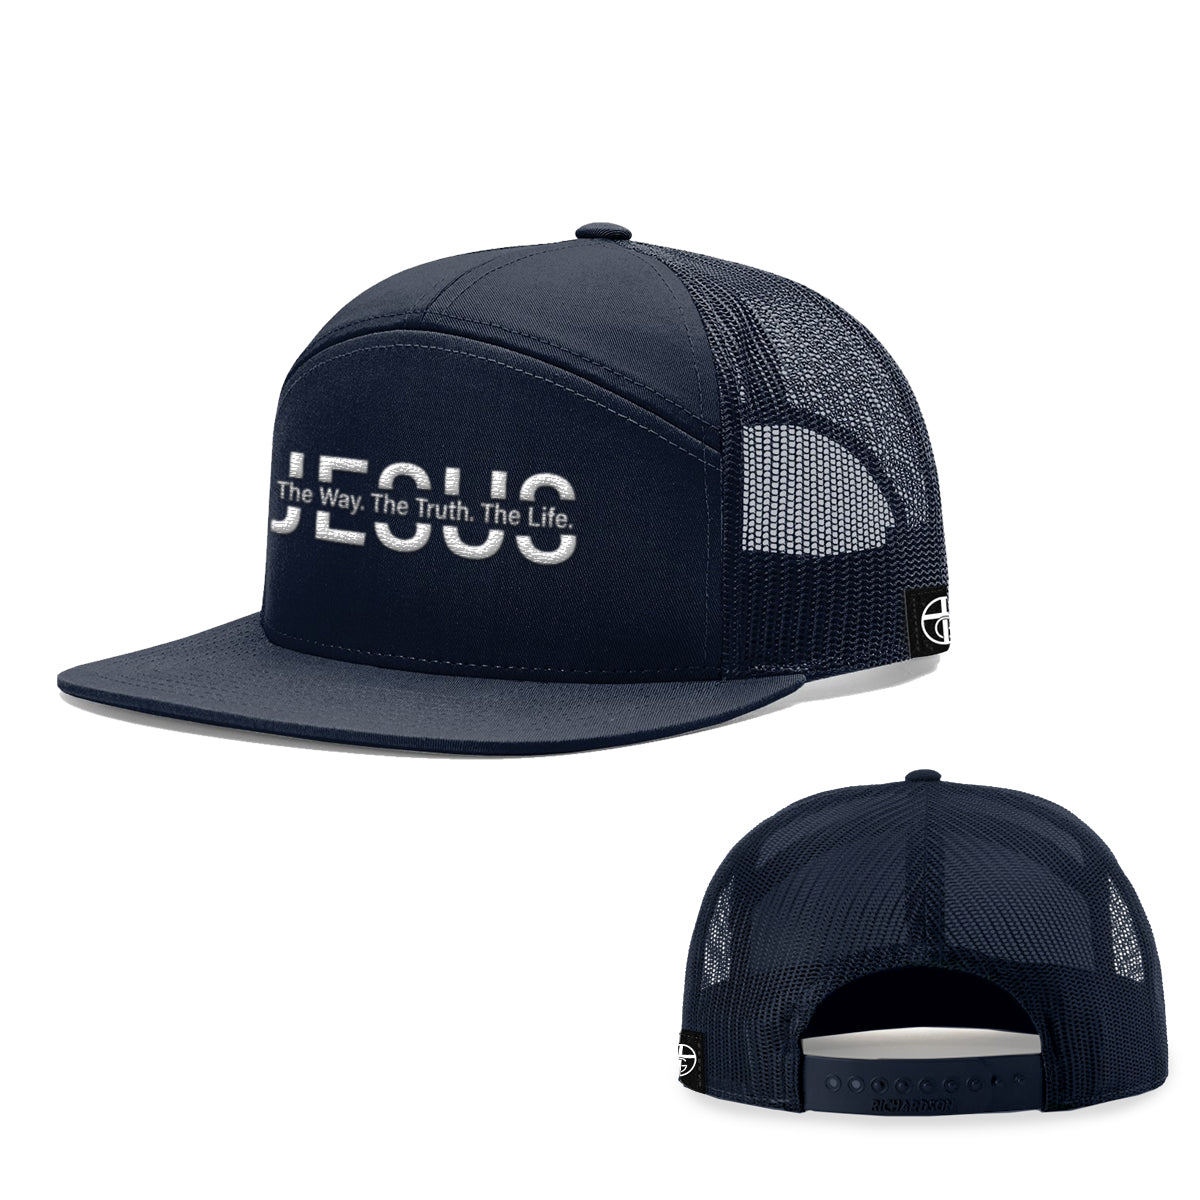 Jesus The Way. The Truth. The Life. 7 Panel Hats